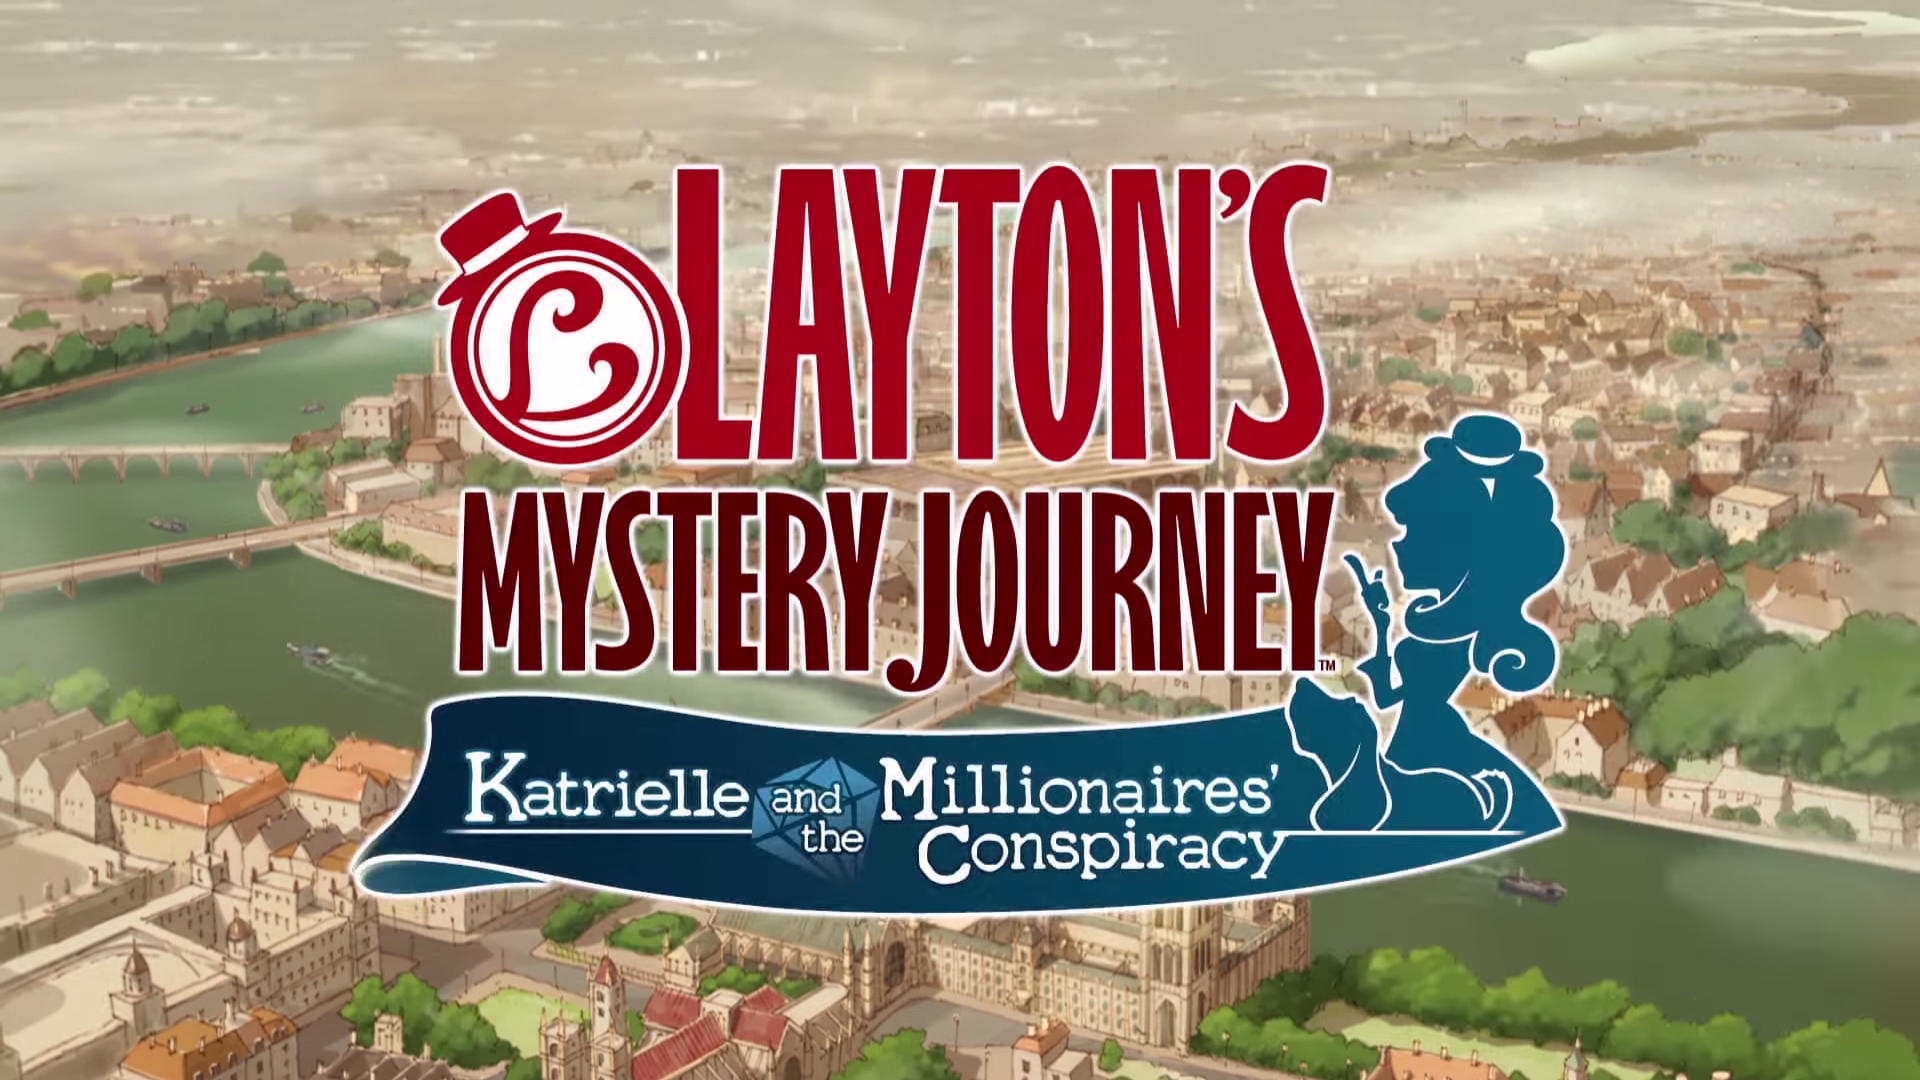 Mystery journey. Layton Mystery Journey. Layton's Mystery Journey: Katrielle and the Millionaires' Conspiracy.